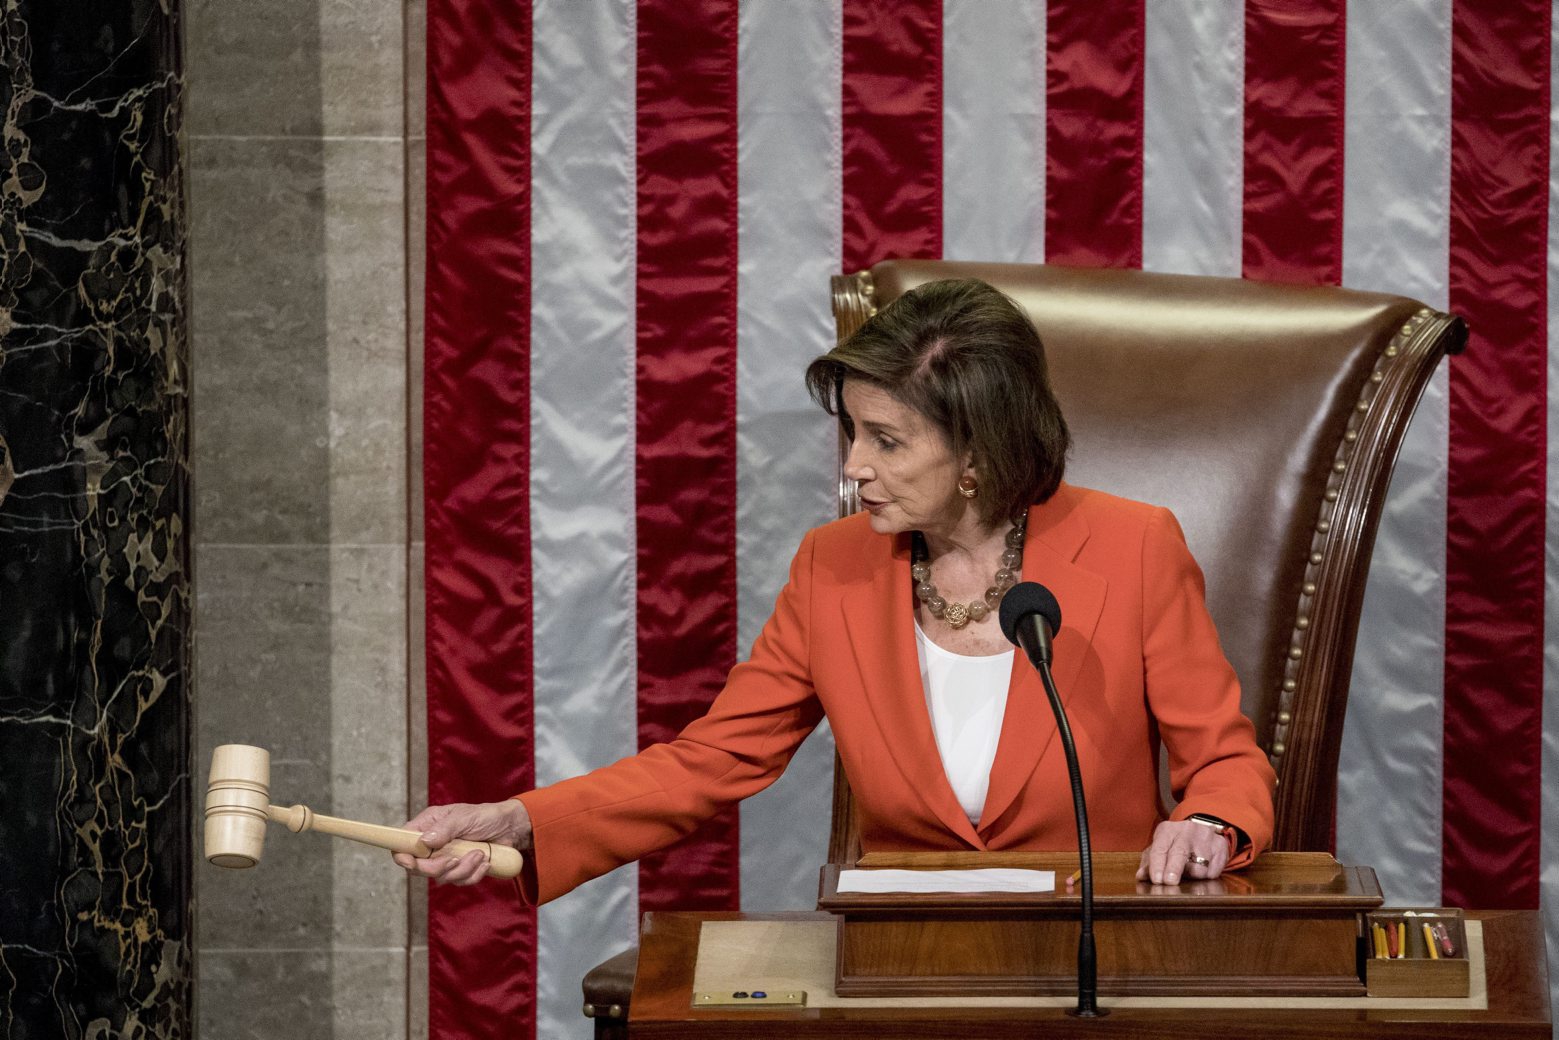 House Speaker Nancy Pelosi of Calif. gavels as the House votes 232-196 to pass resolution on impeachment procedure to move forward into the next phase of the impeachment inquiry into President Trump in the House Chamber on Capitol Hill in Washington, Thursday, Oct. 31, 2019. The resolution would authorize the next stage of impeachment inquiry into President Donald Trump, including establishing the format for open hearings, giving the House Committee on the Judiciary the final recommendation on impeachment, and allowing President Trump and his lawyers to attend events and question witnesses. (AP Photo/Andrew Harnik)
Nancy Pelosi Trump Impeachment Resolution